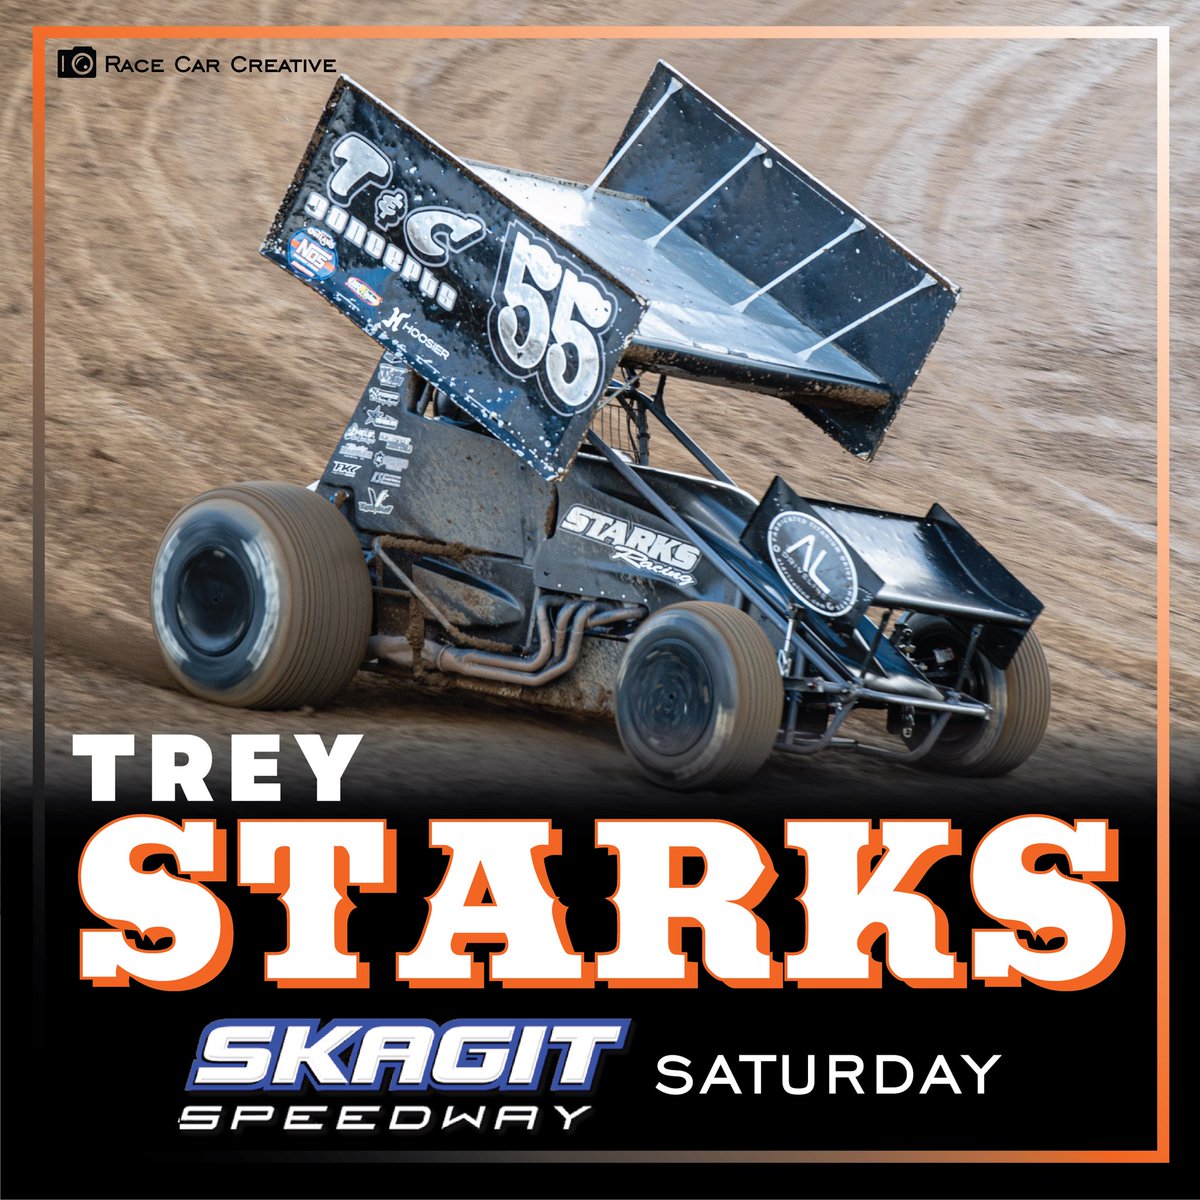 Defending @skagitspeedway track champion @Starks55Trey looks to increase his lead in the championship standings this Saturday! #TeamILP